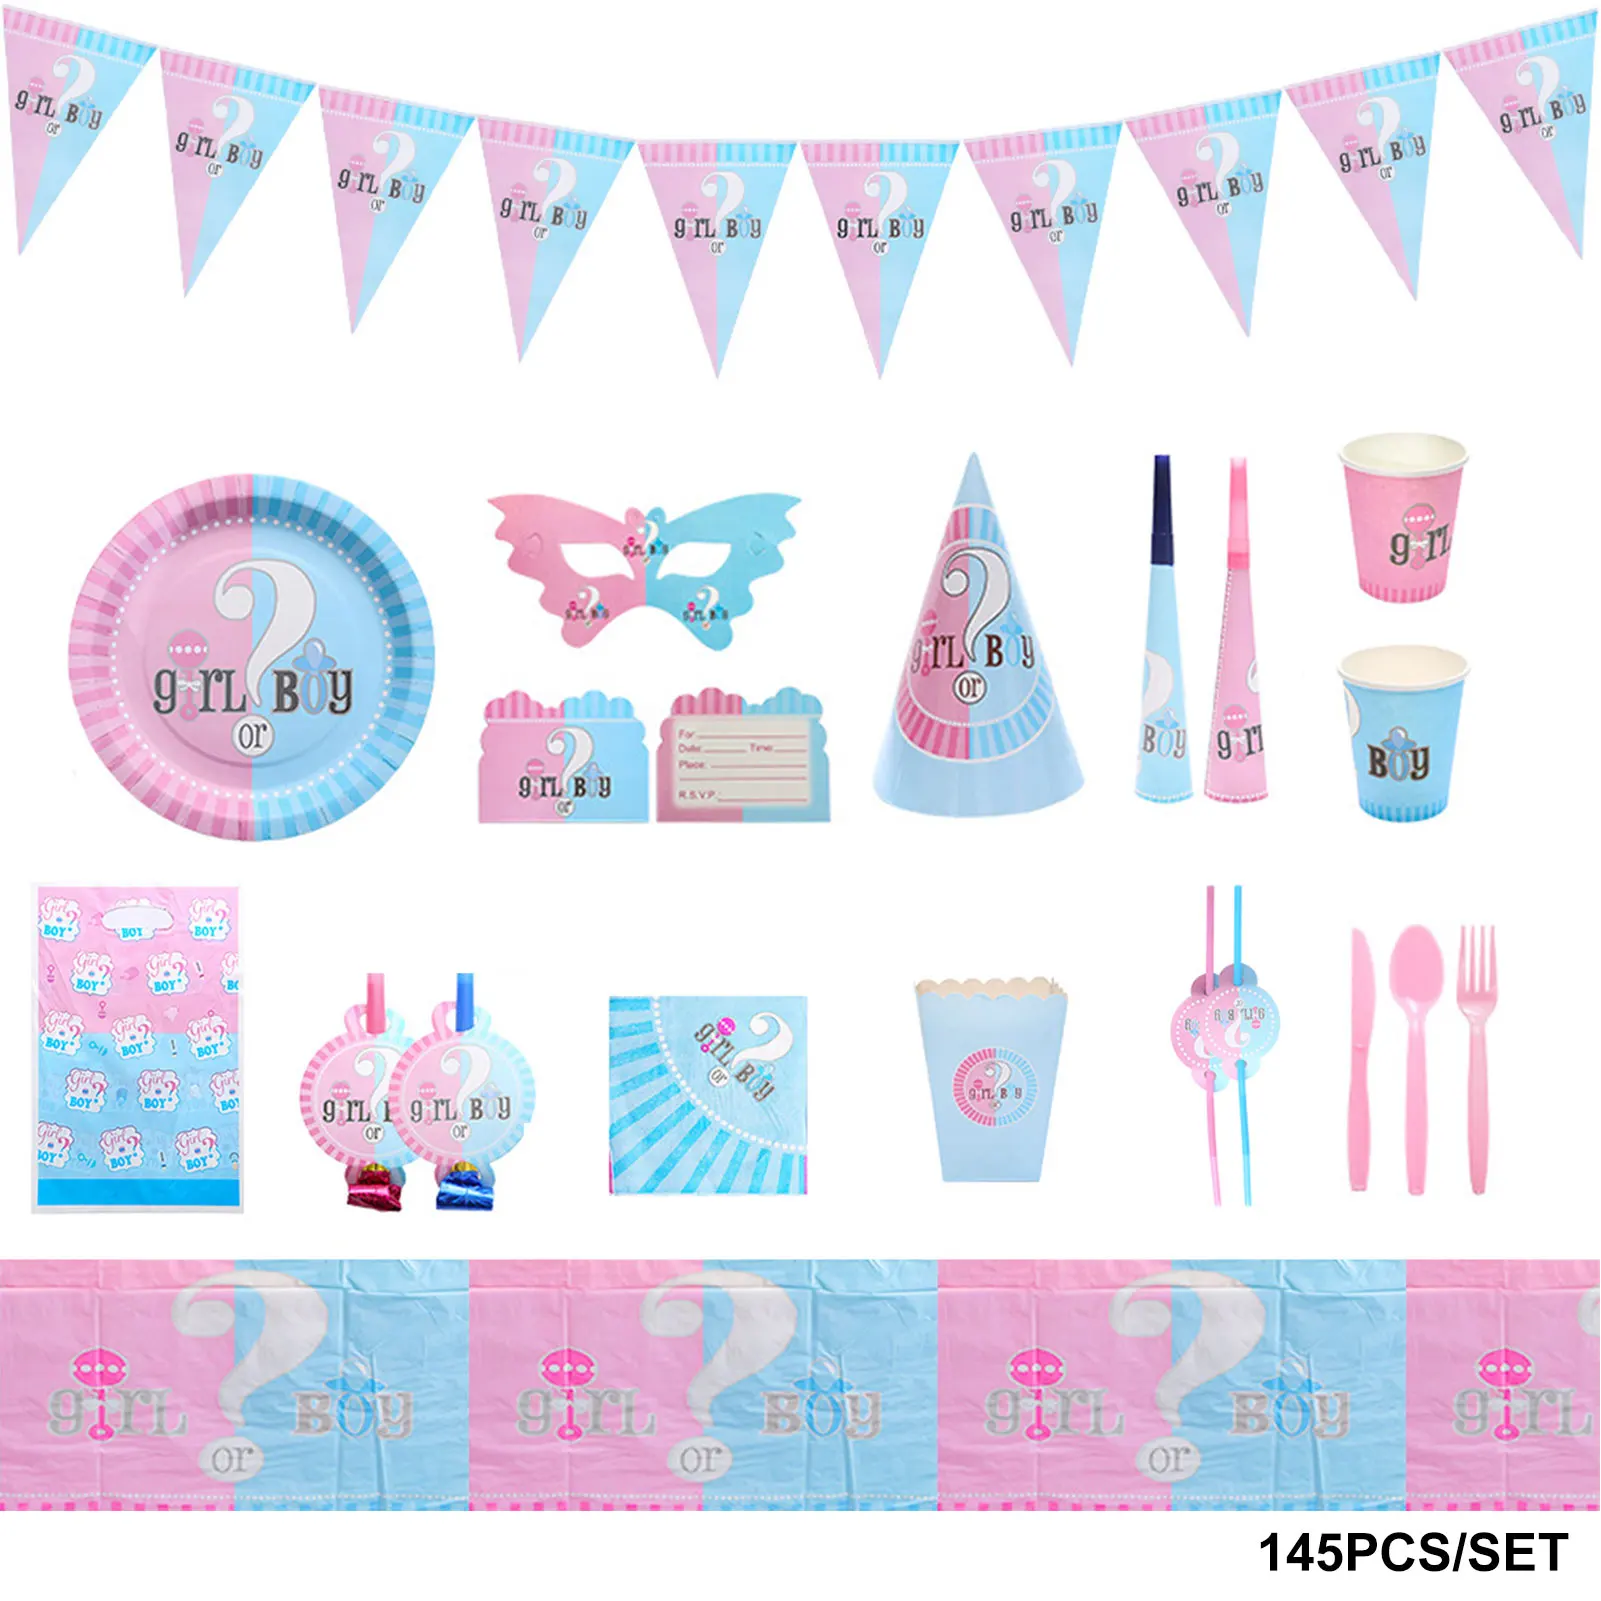 

145pcs/set Straws Napkins Boy Or Girl Gender Reveal Party Decoration Tablecloth Gift Bag Banner Plates Cups Invitation Card Home